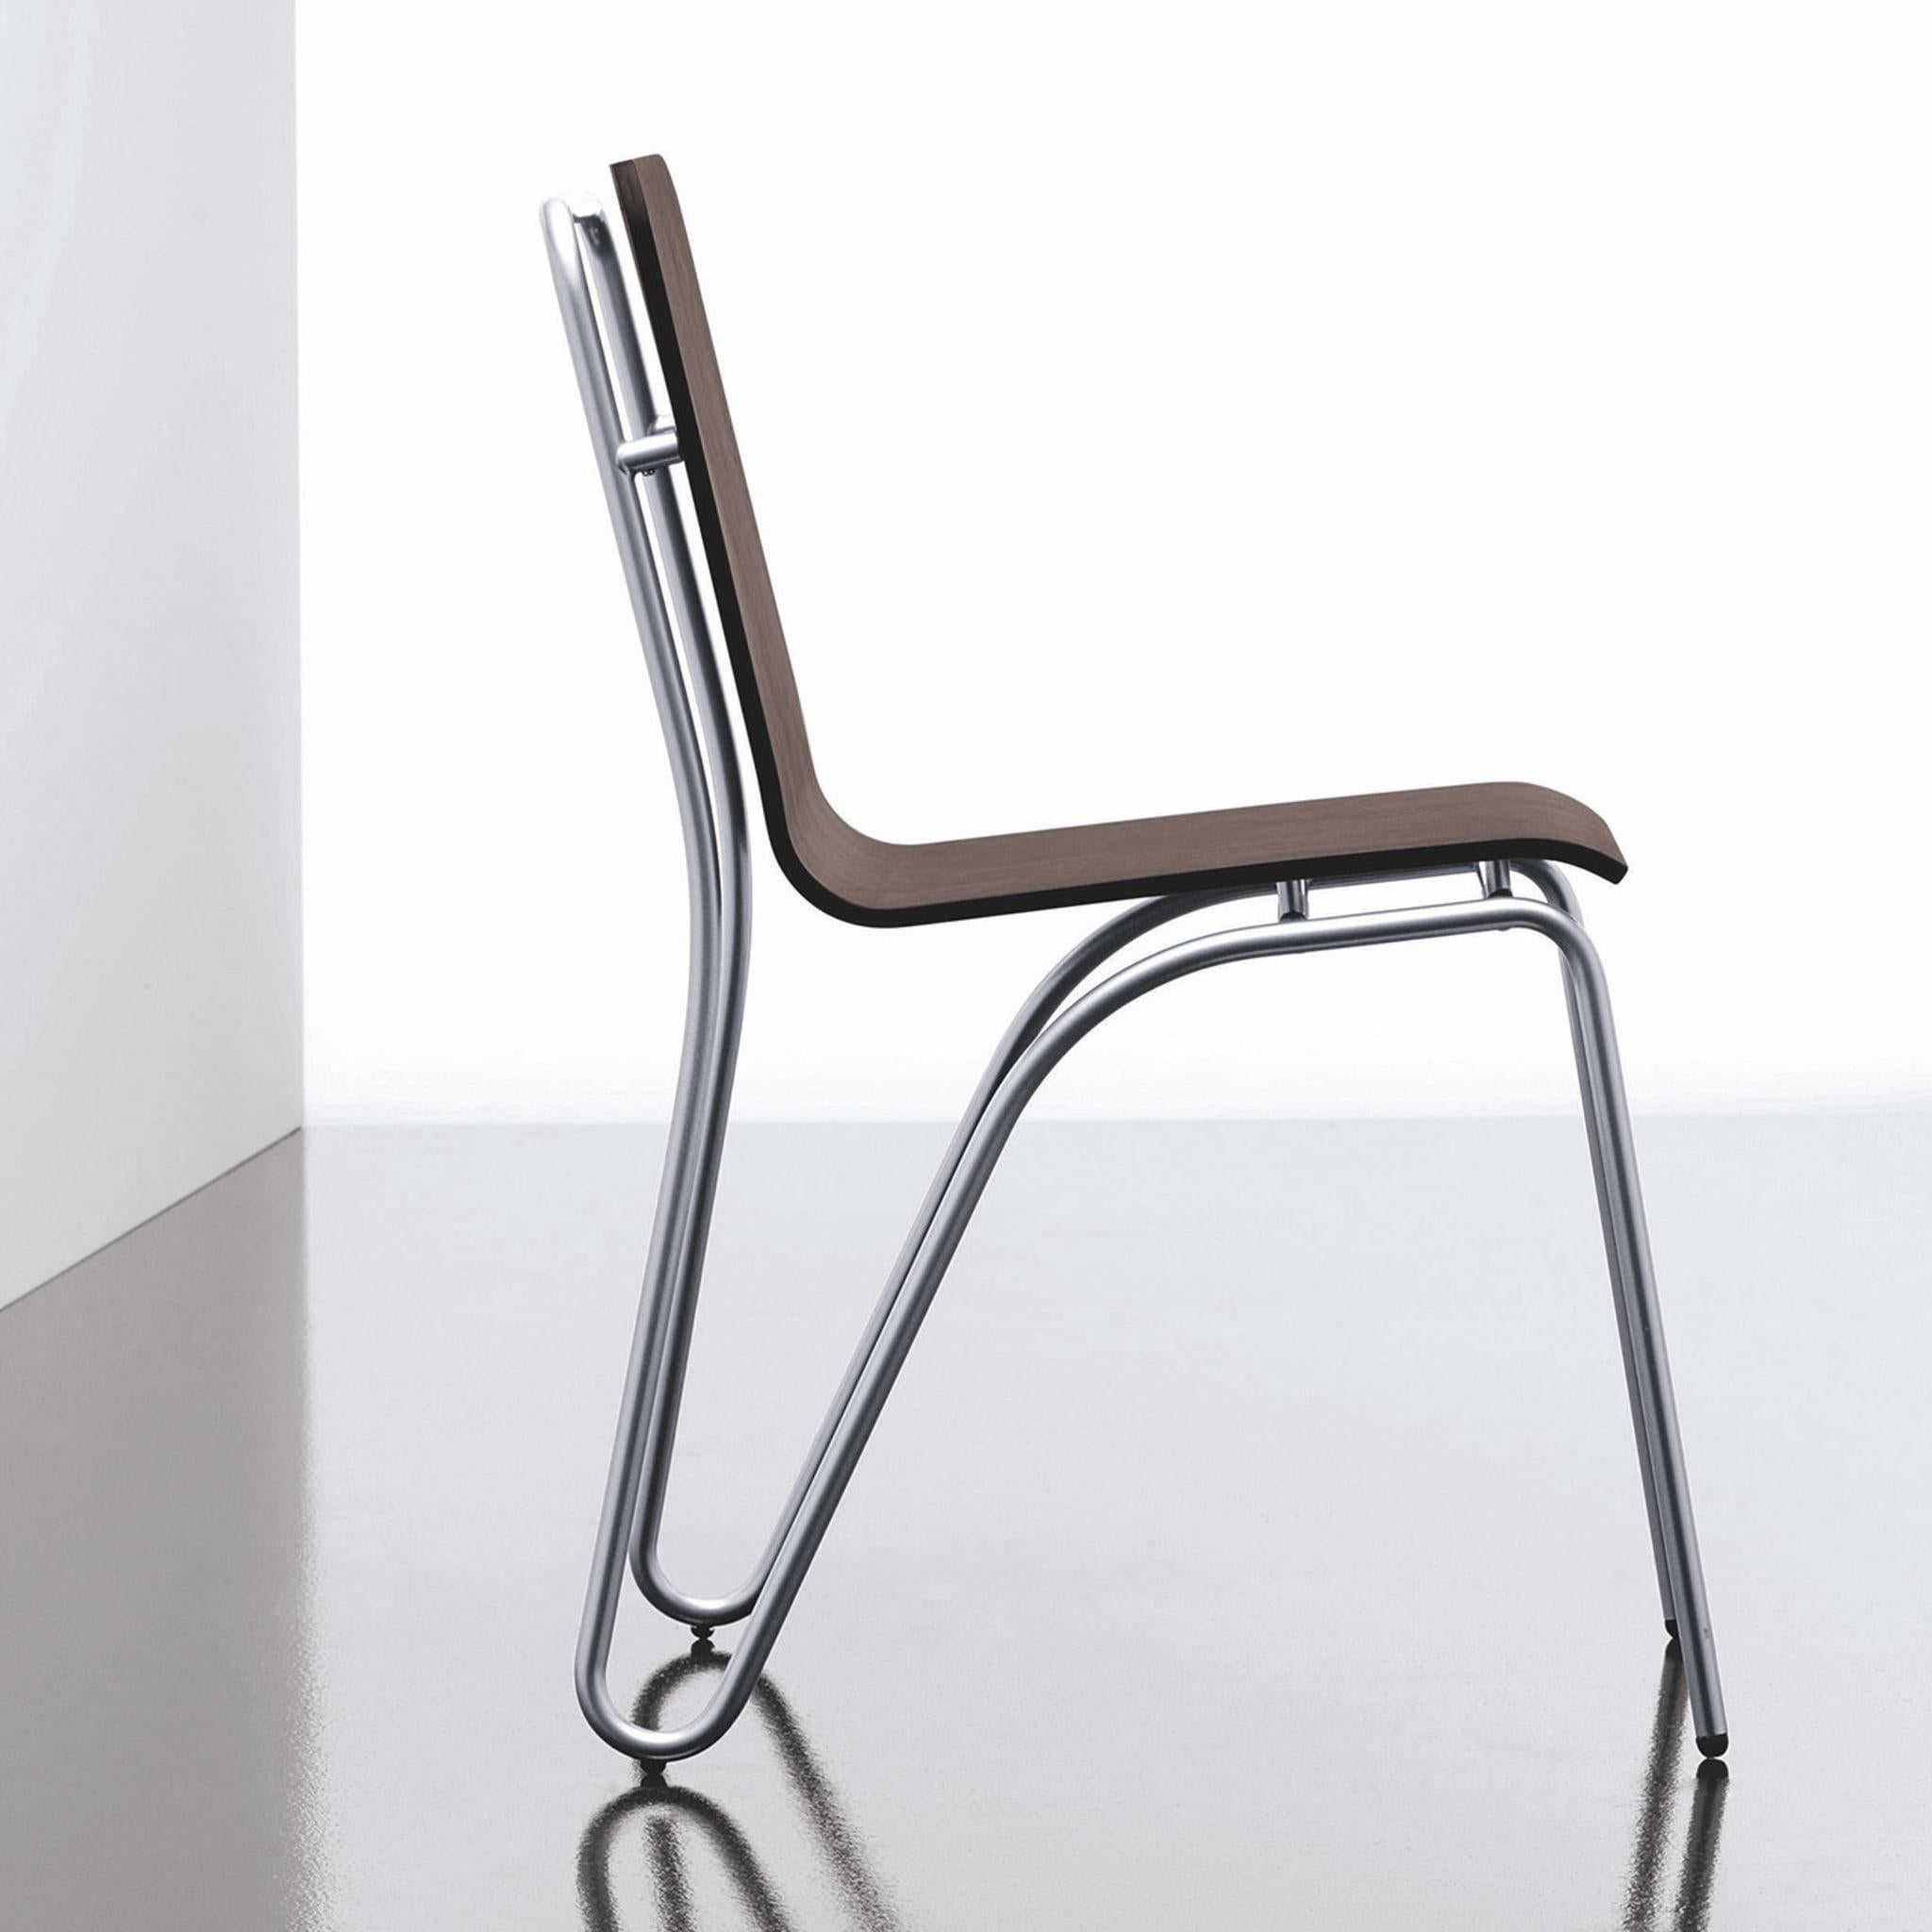 This chair's extremely unique frame is made from seamless, bent, steel tubing with a satin chrome finish. Its beech plywood shell sports a black-oak veneer. This item's silhouette is dynamic, yet sturdy. It is also available in a selection of